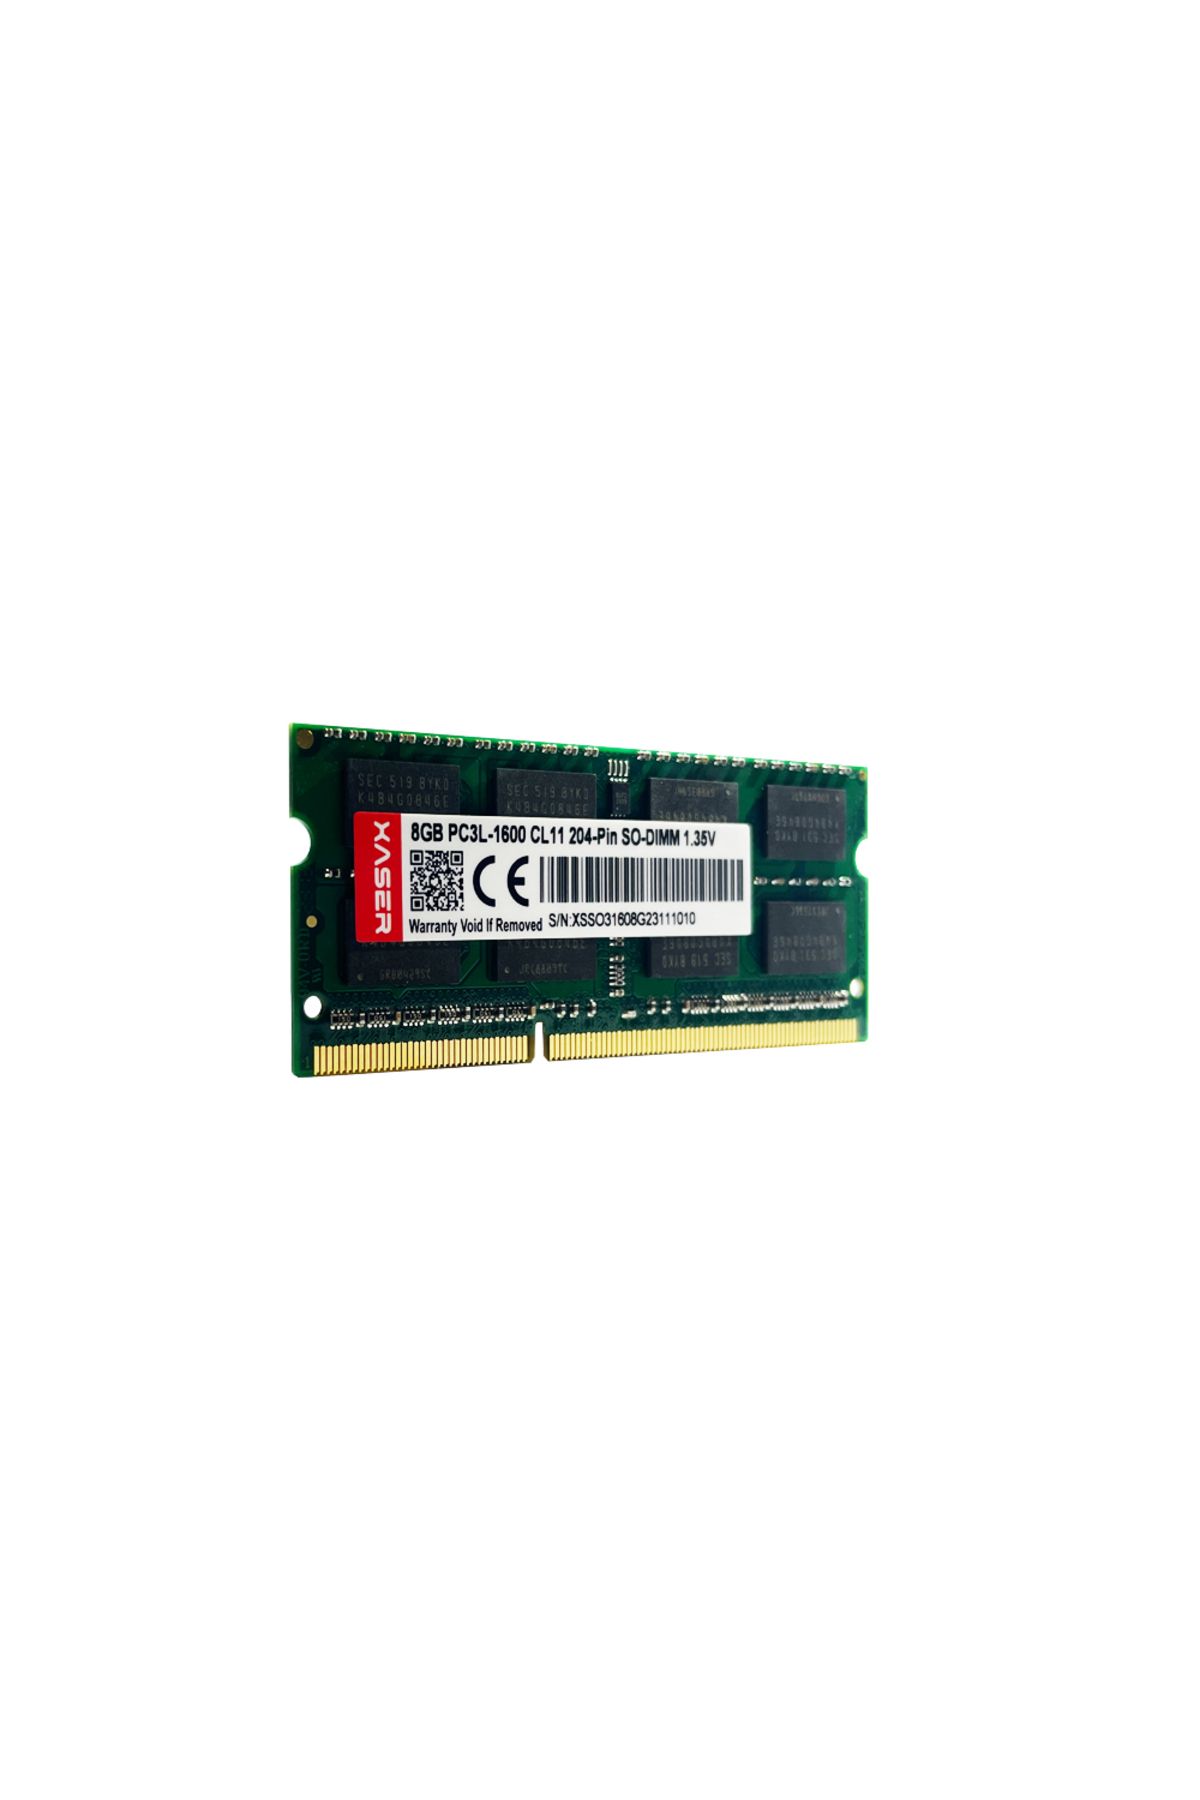 XASER XS16S11/8 8GB DDR3 1600MHz 1.35V CL11 Notebook Ram